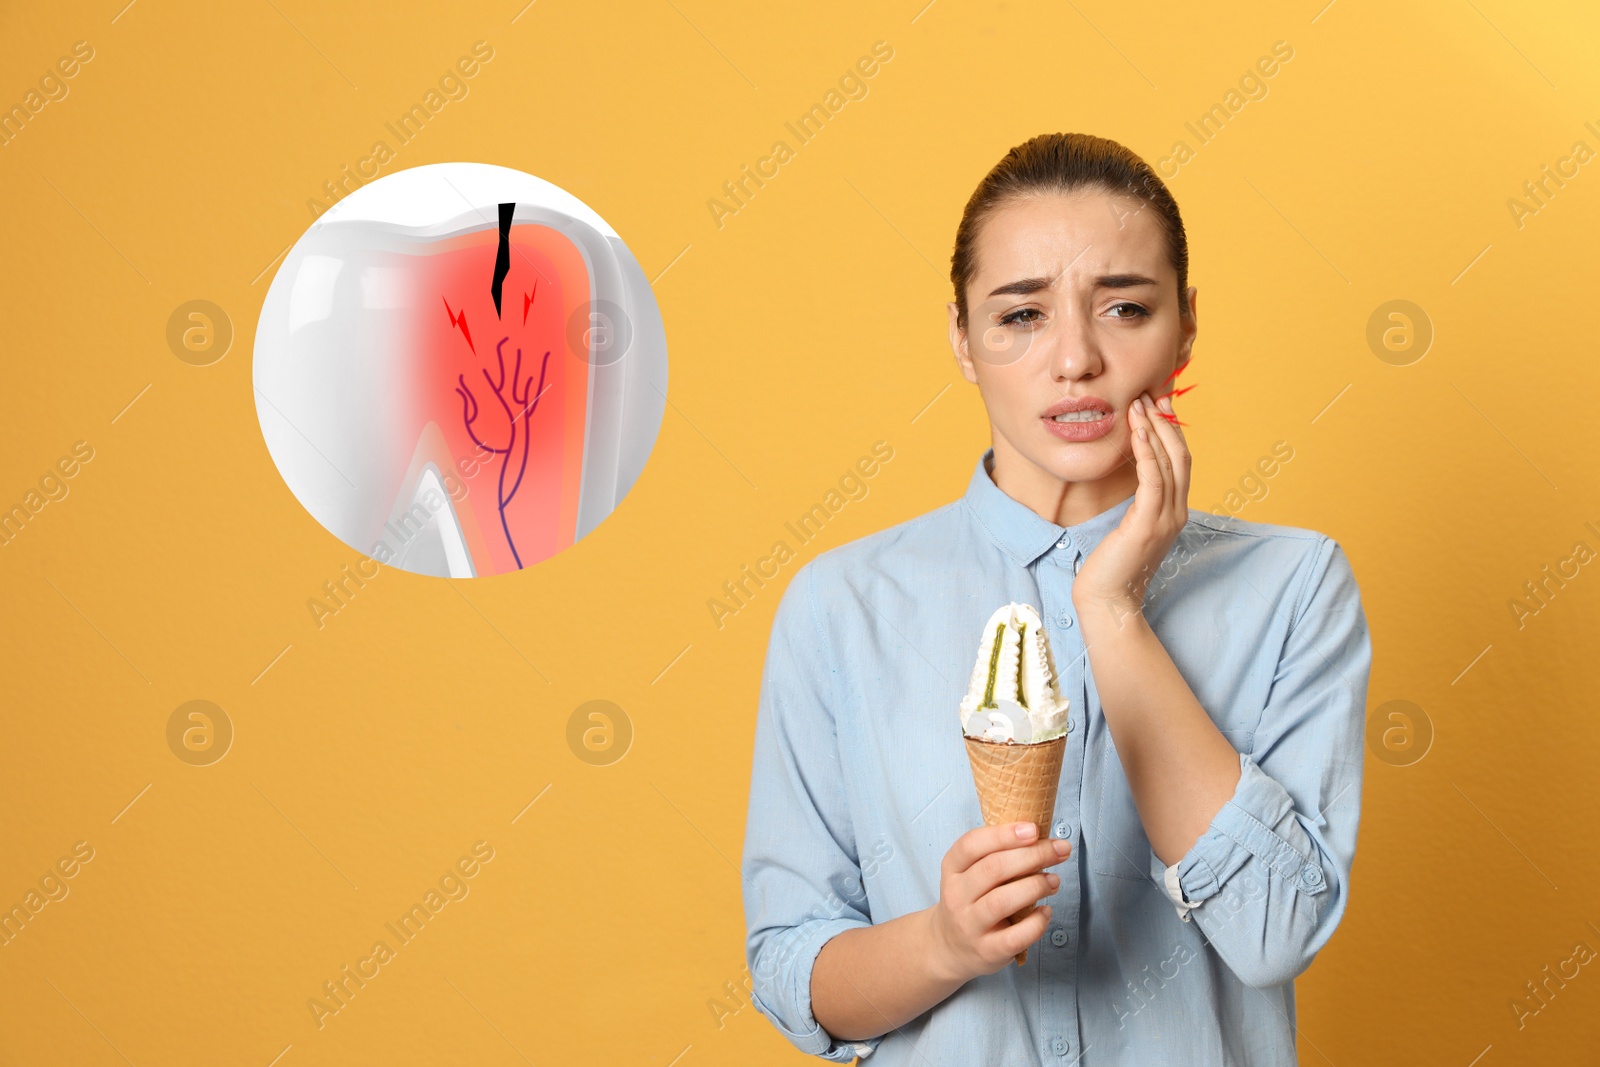 Image of Young woman with ice cream suffering from acute toothache on orange background